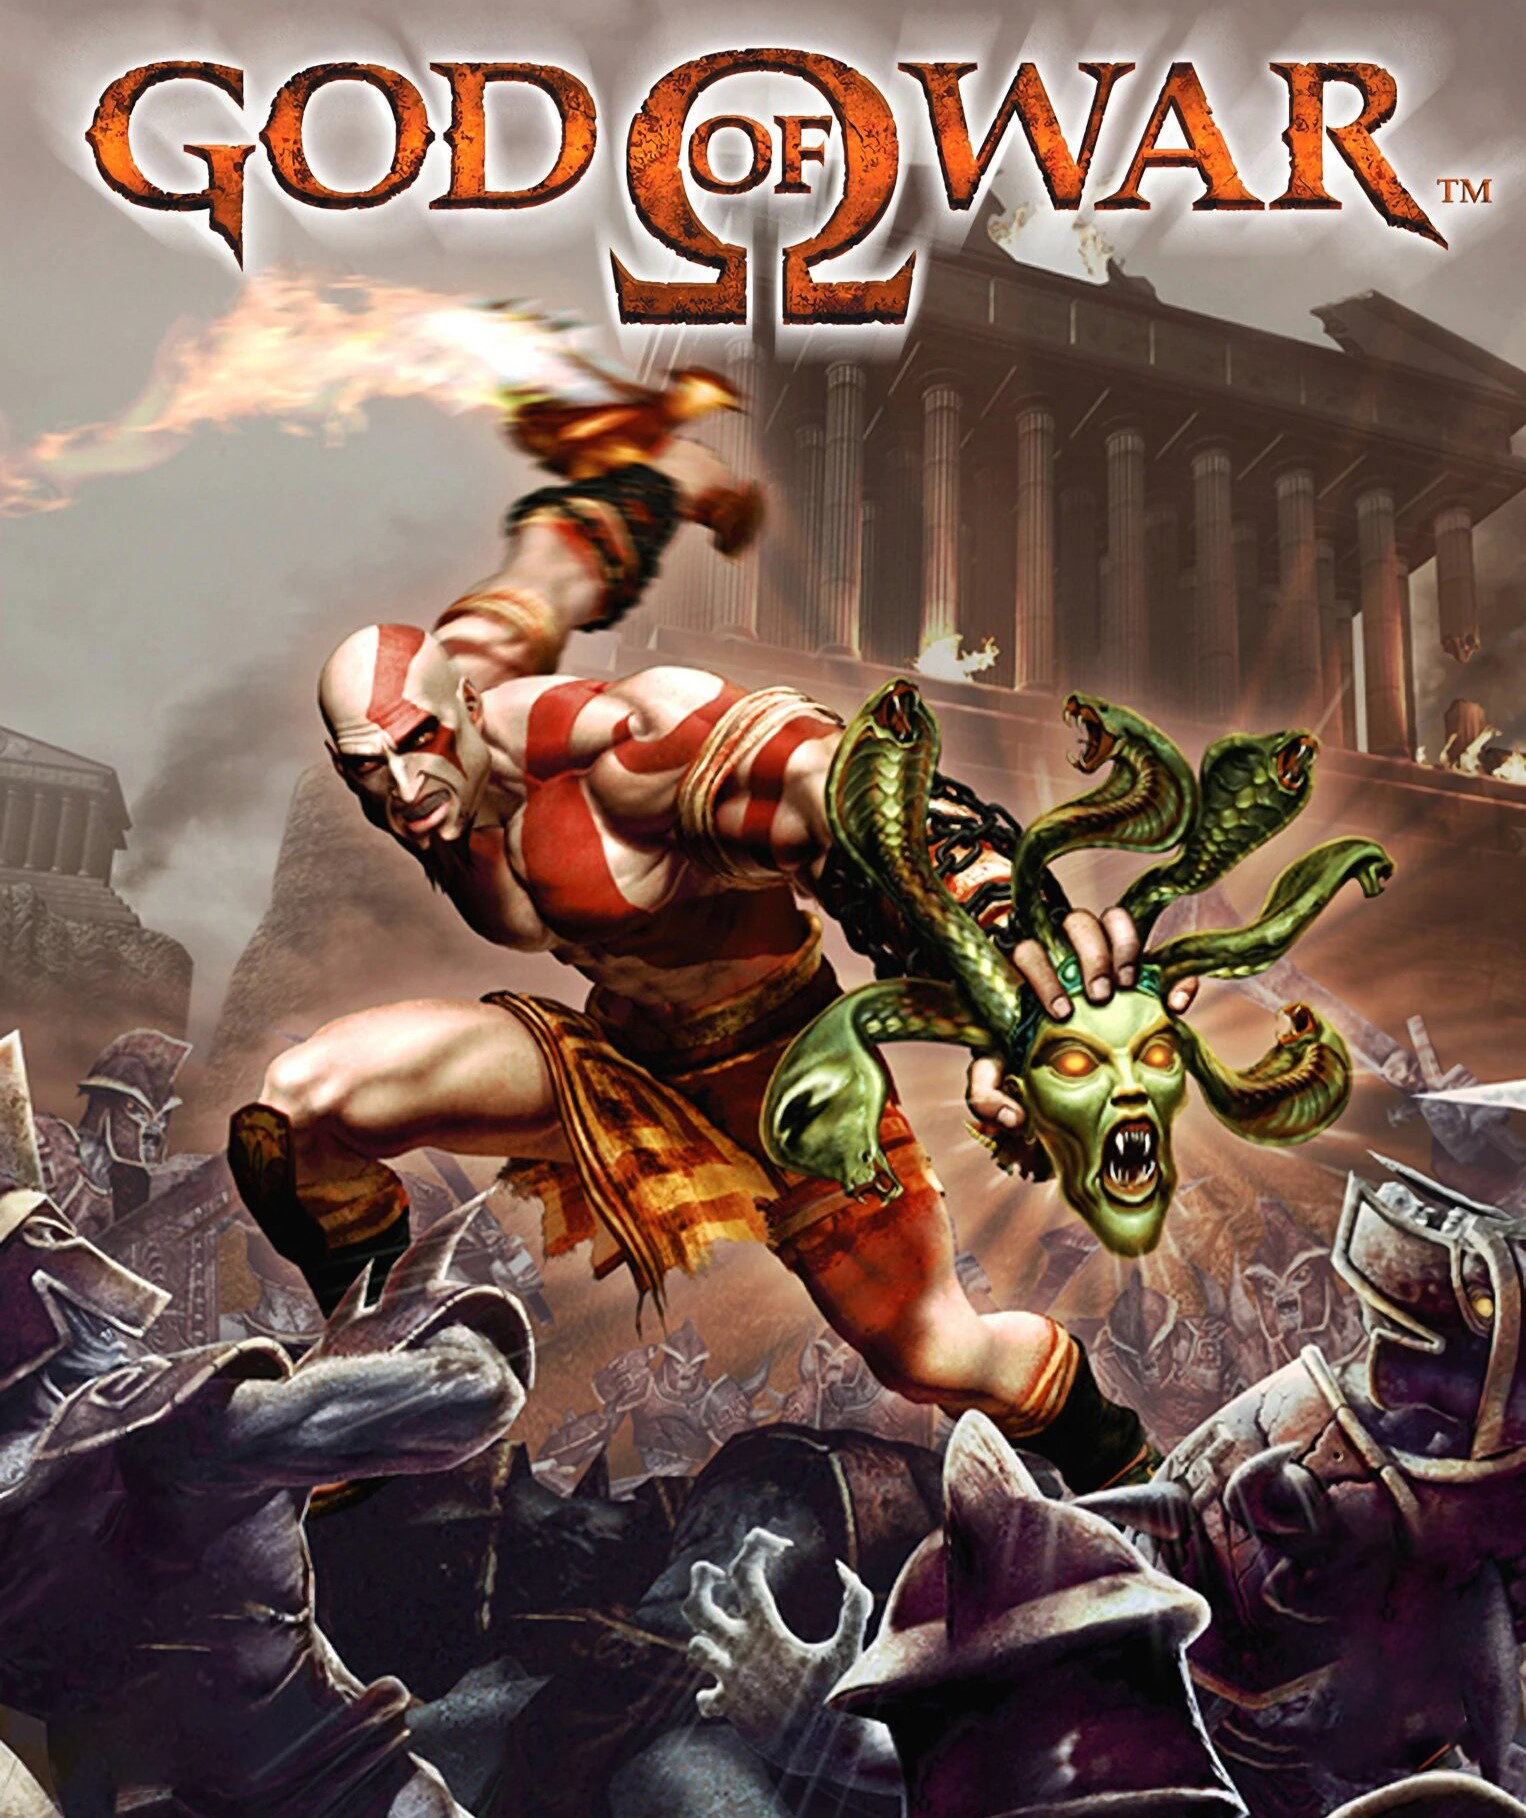  God of War - PlayStation 2 : Unknown: Video Games